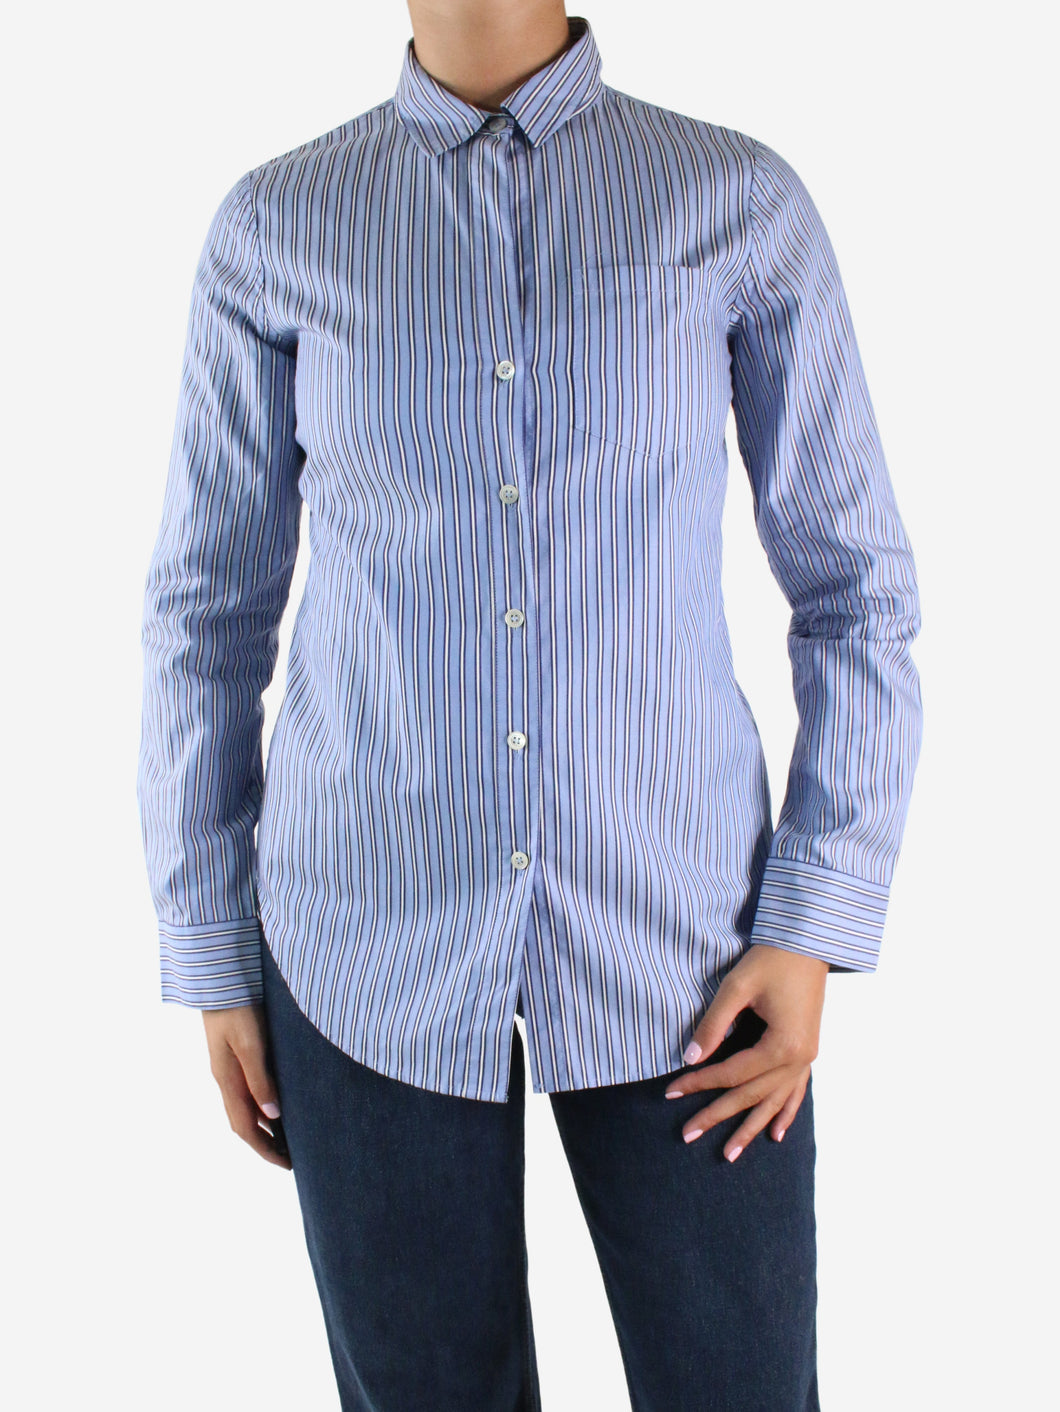 Blue striped button-up shirt - size S Tops Theory 